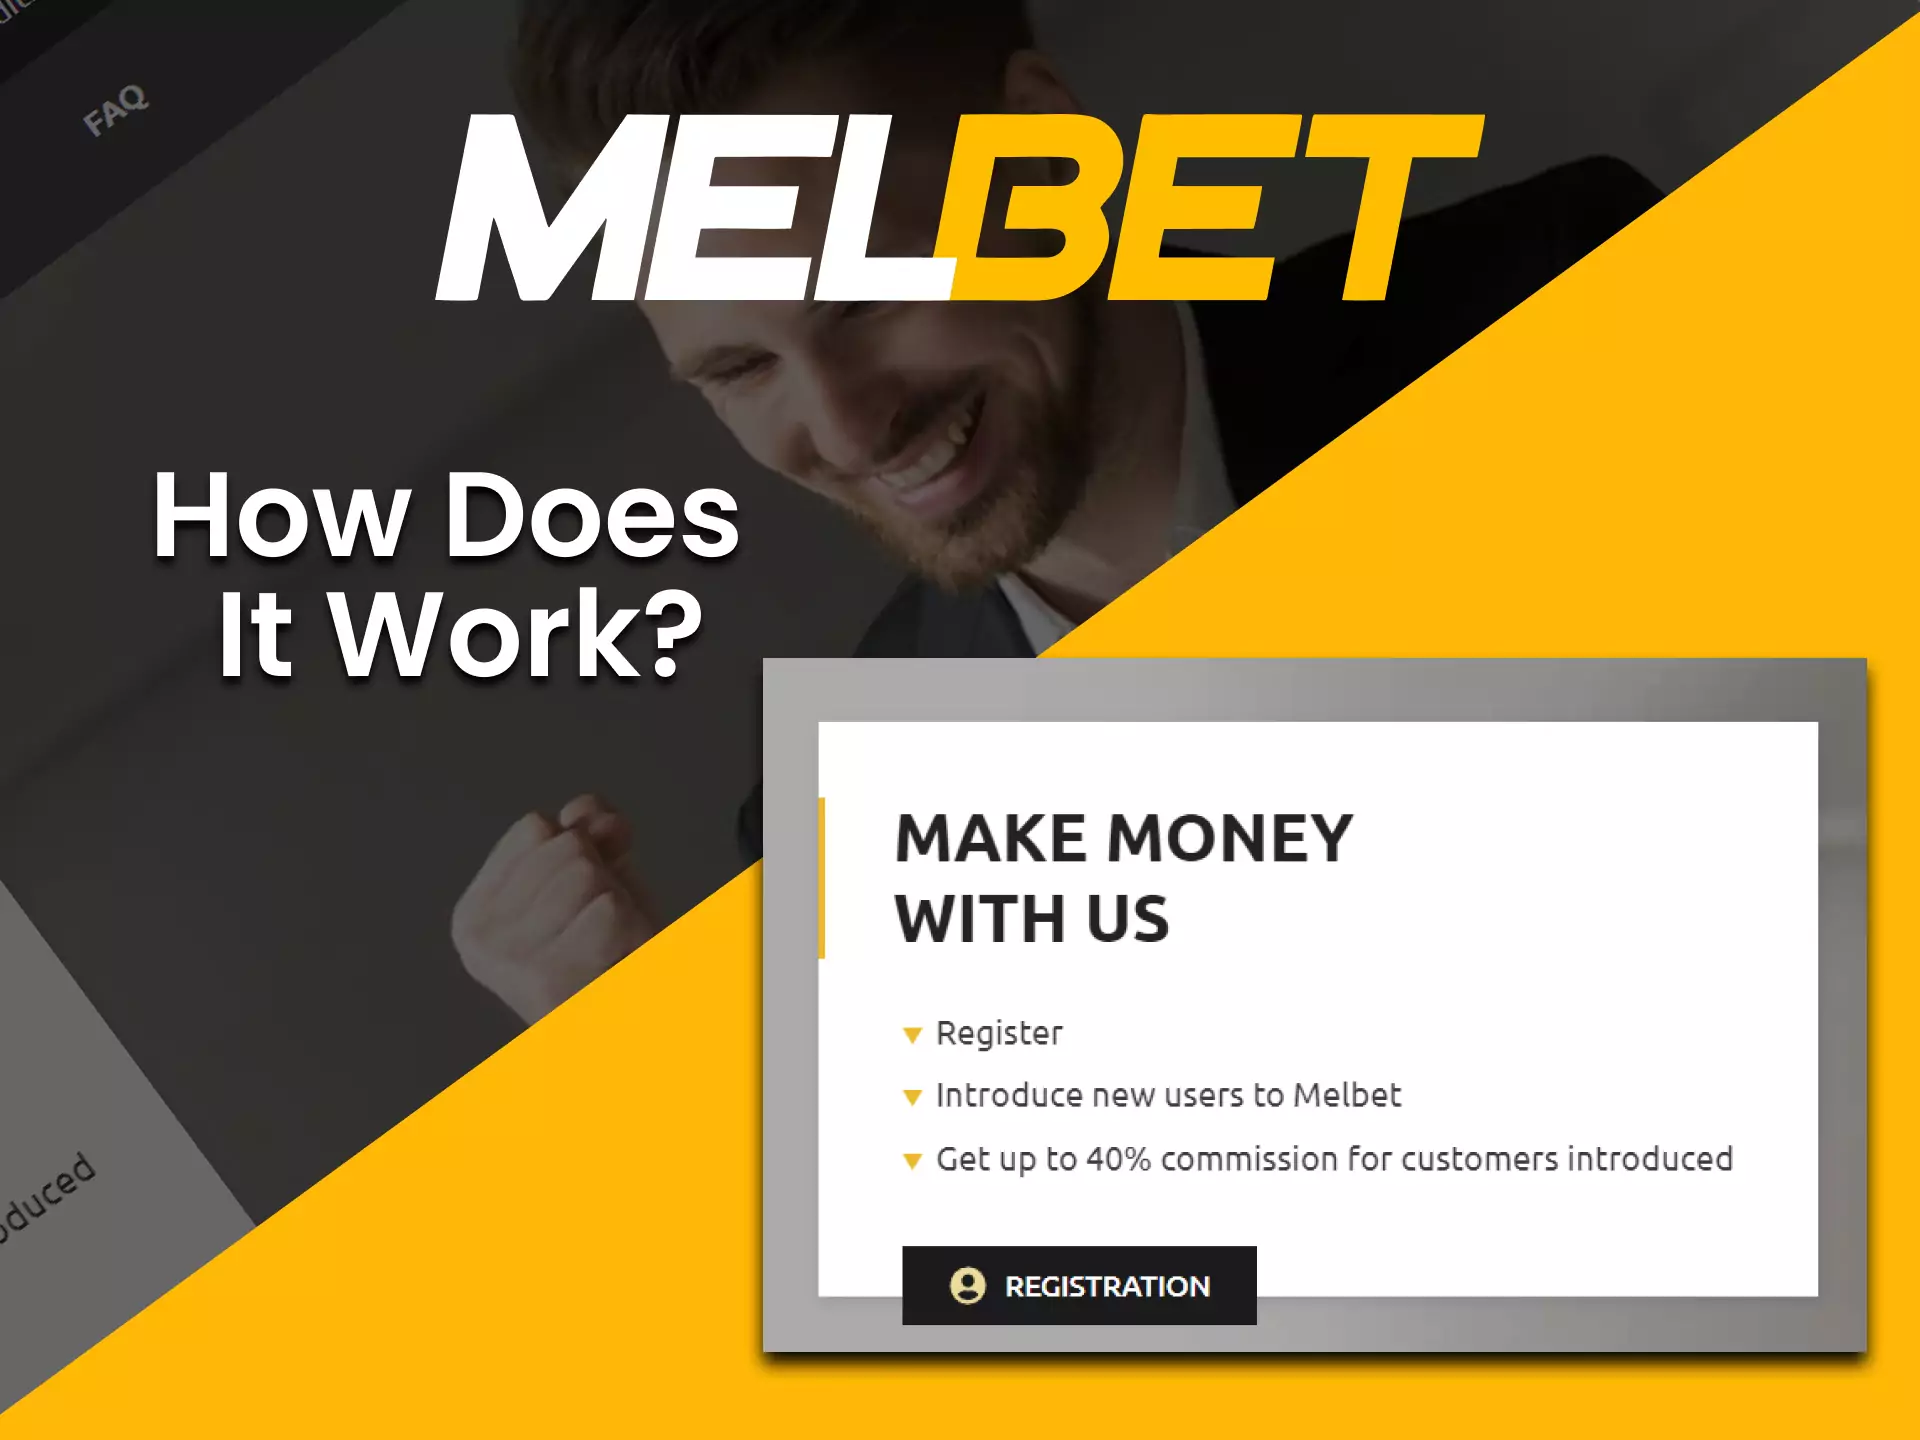 You can invite newcomers to the betting platform and get profit from the Melbet affiliate program.